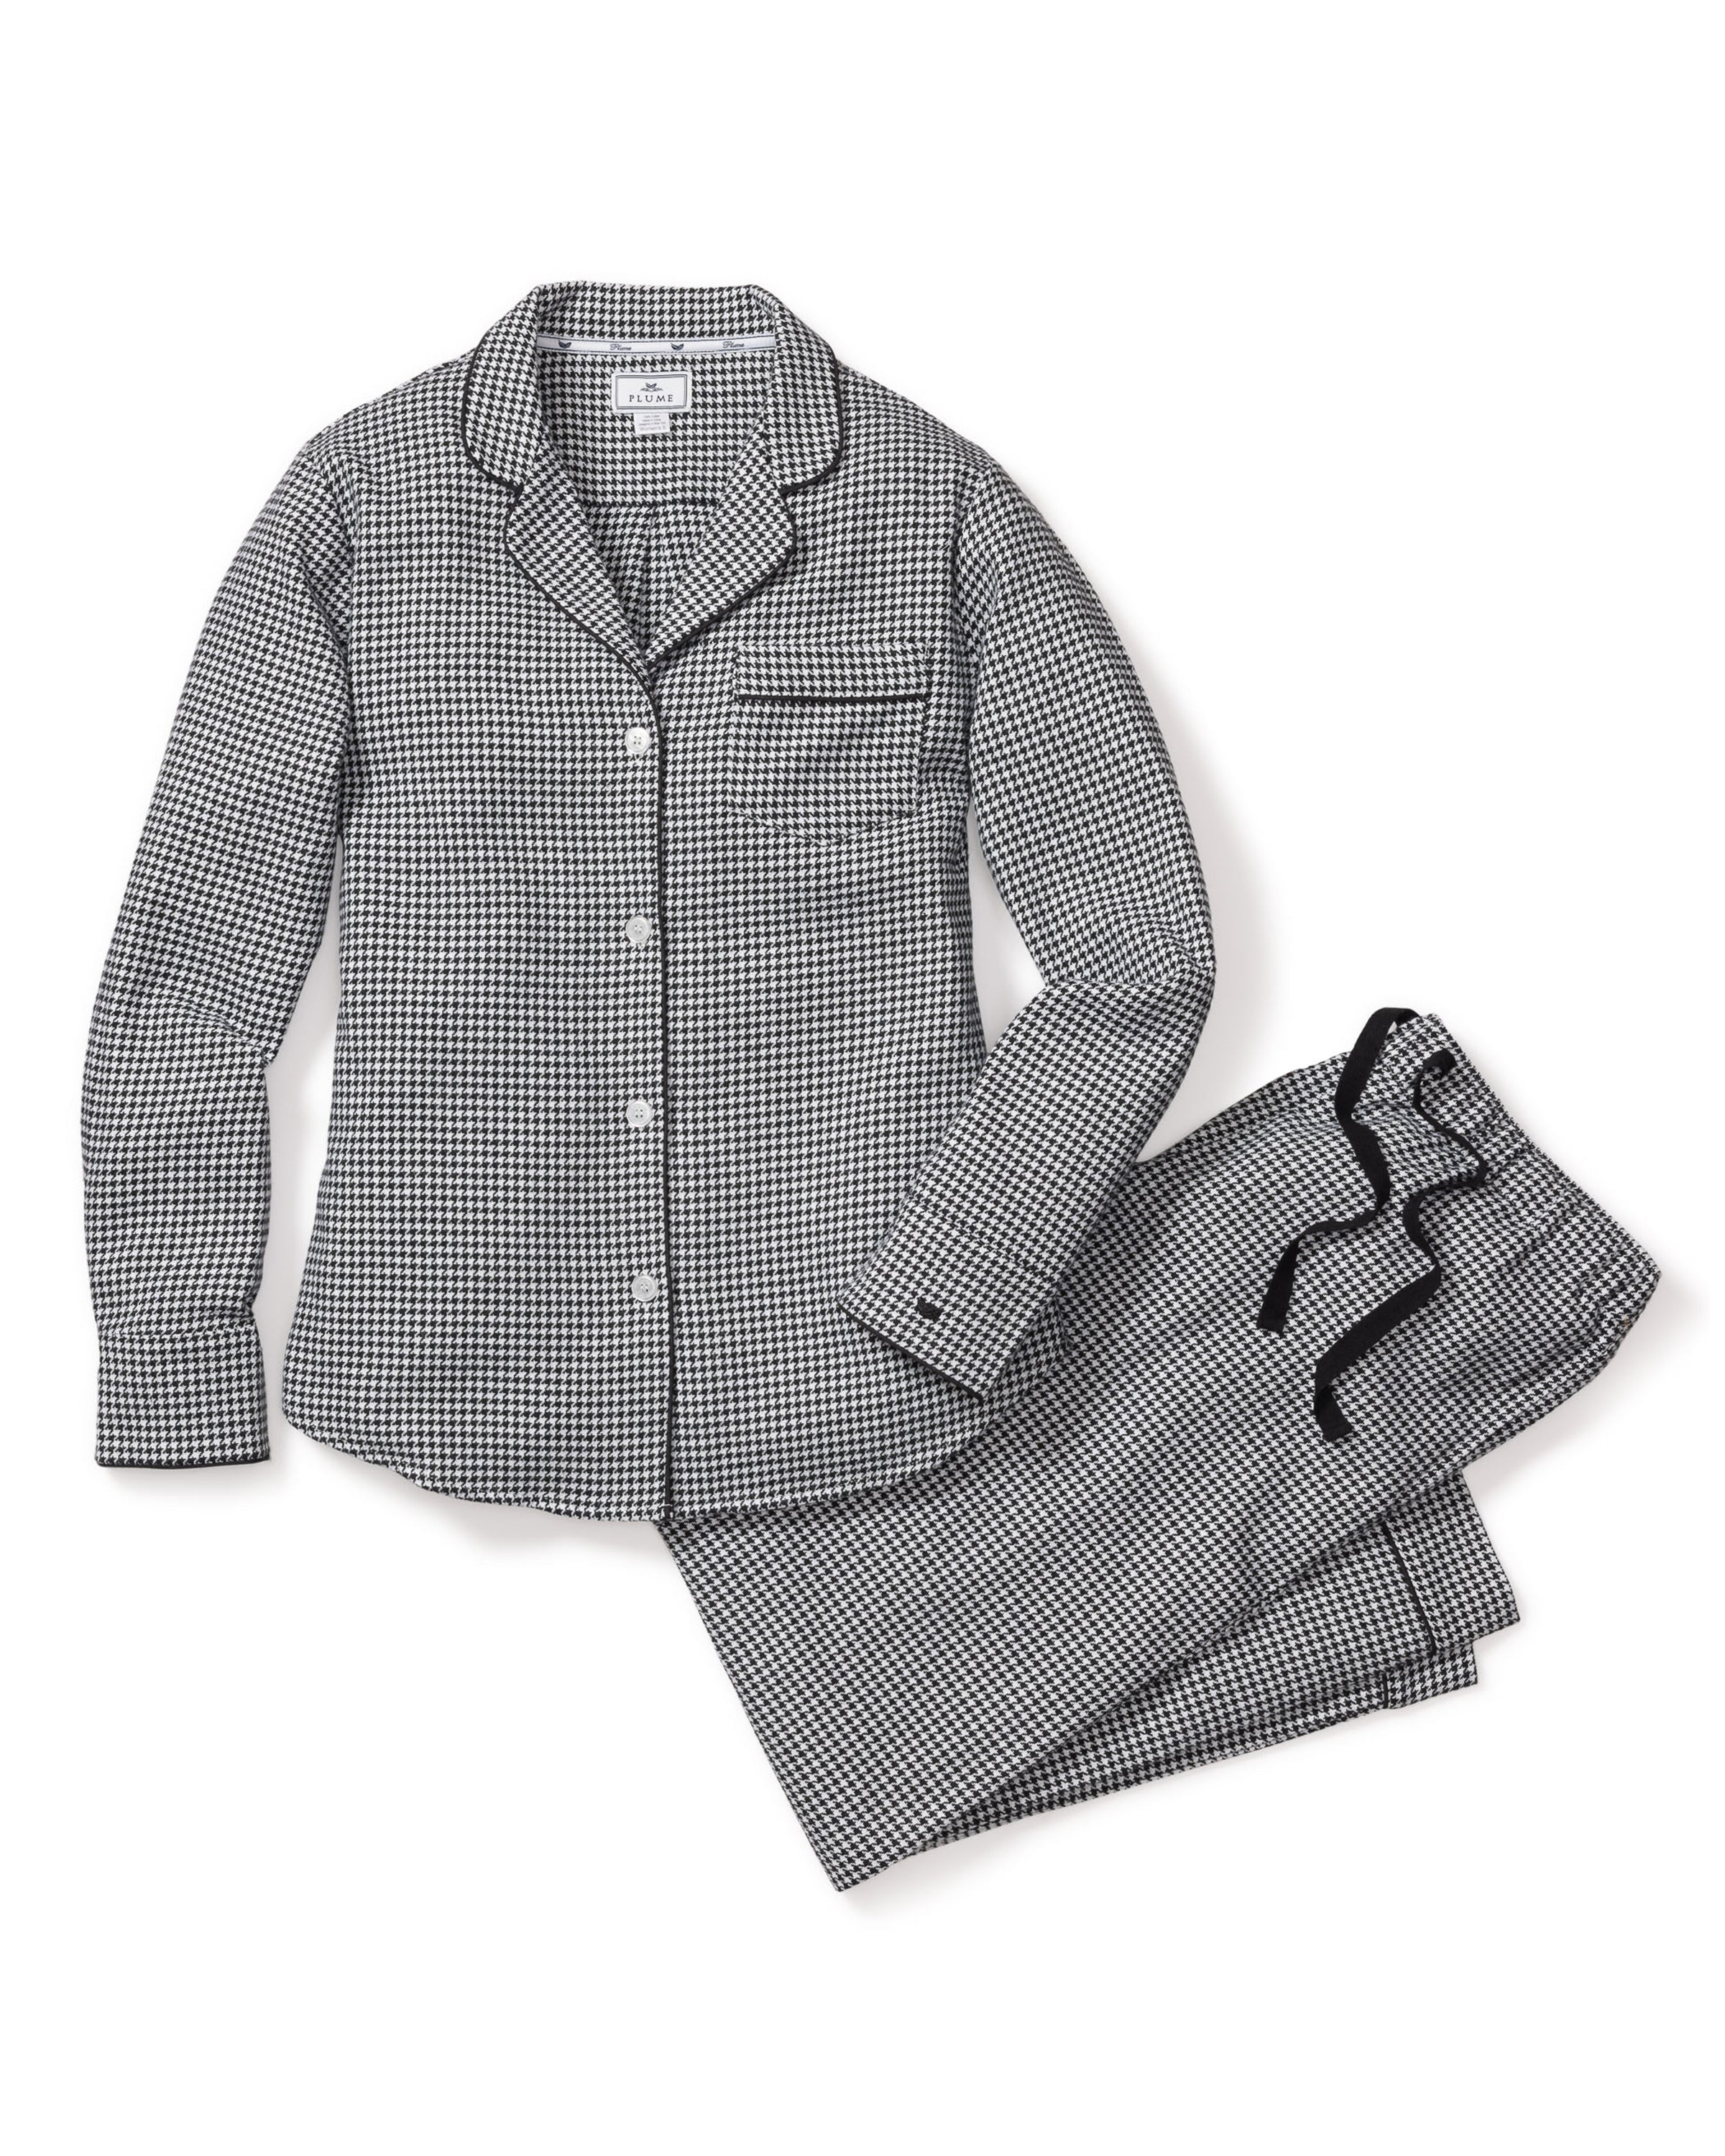 Women's Flannel Pajama Set in West End Houndstooth